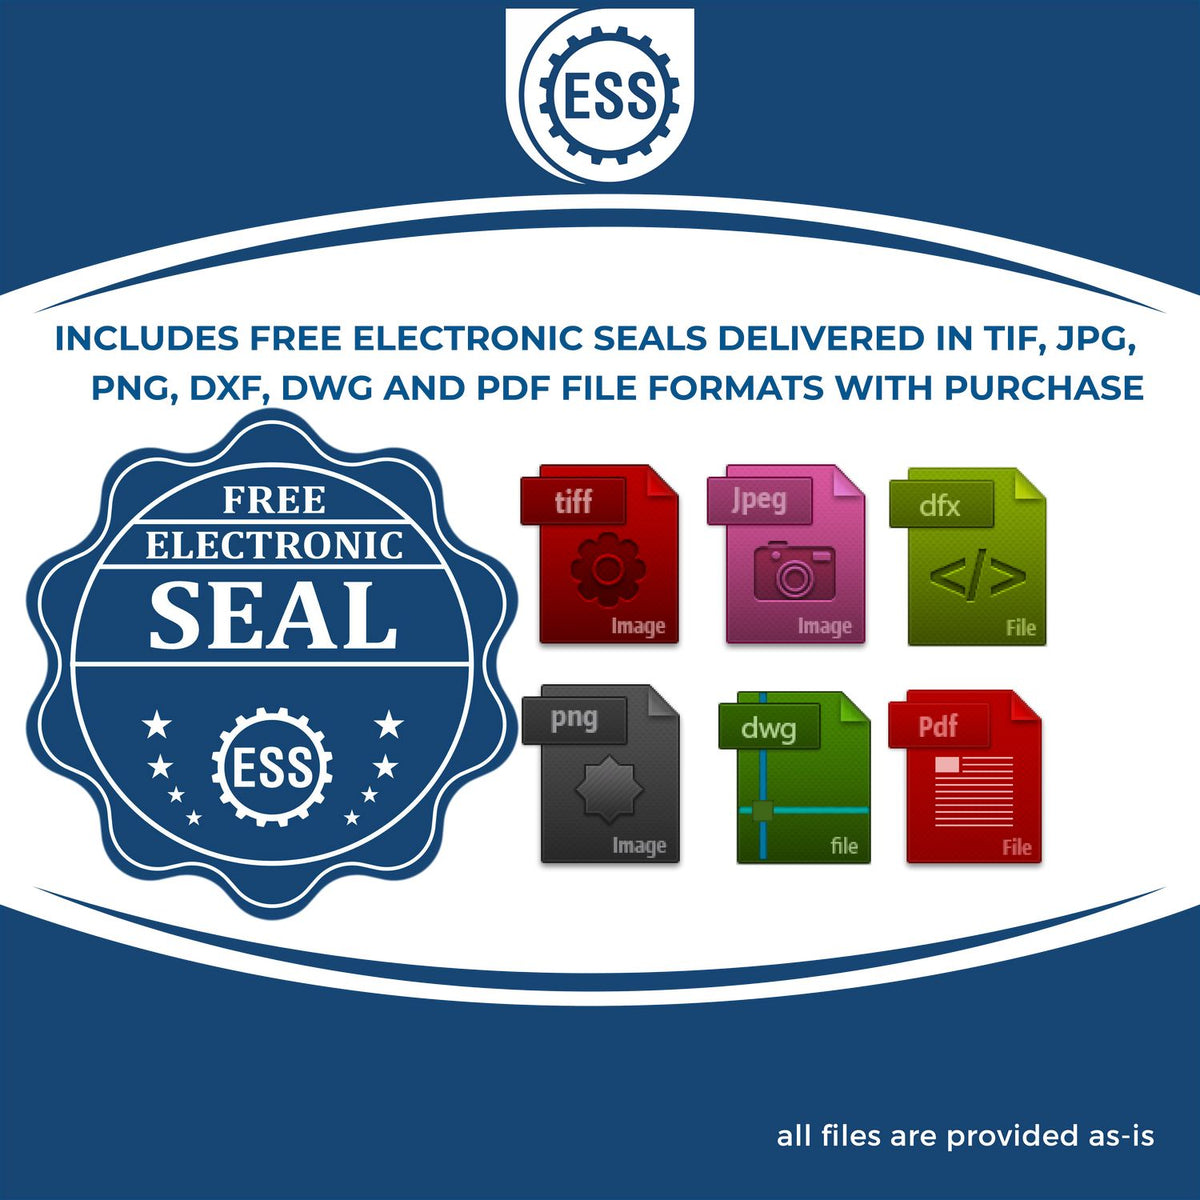 An infographic for the free electronic seal for the Heavy Duty Cast Iron Nebraska Geologist Seal Embosser illustrating the different file type icons such as DXF, DWG, TIF, JPG and PNG.